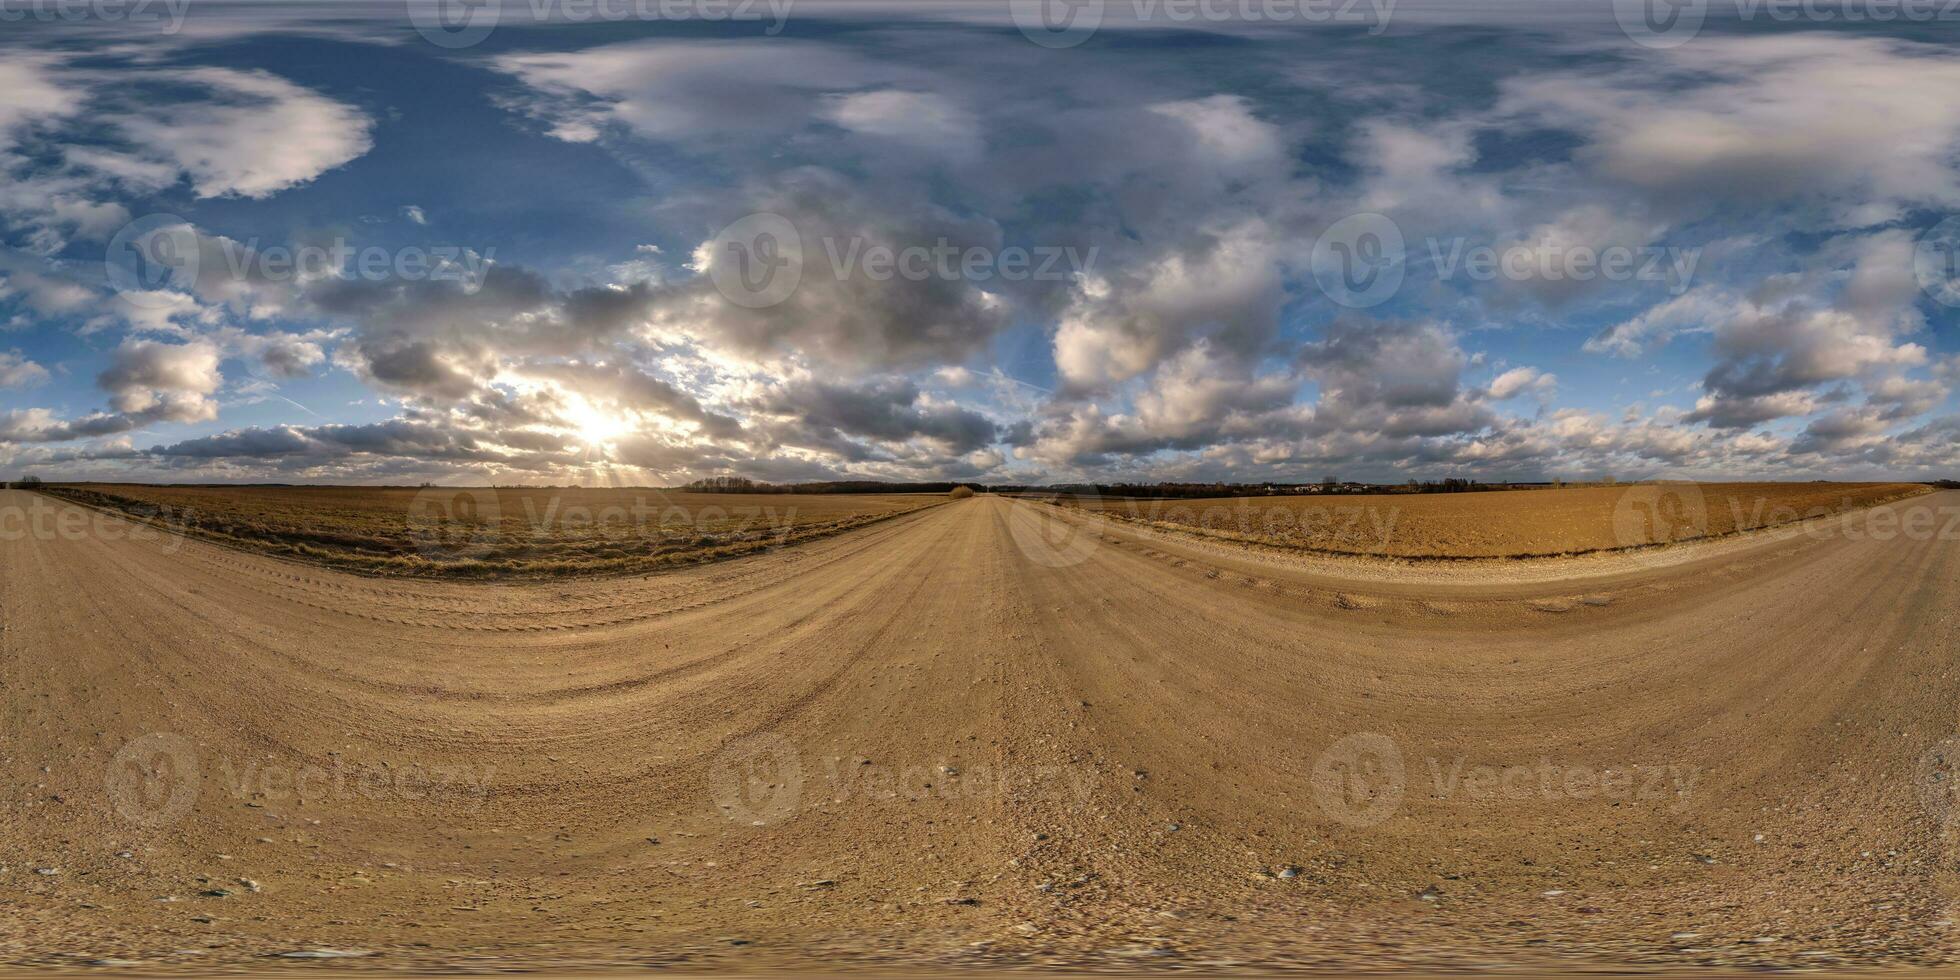 360 hdri panorama on gravel road with evening clouds on blue sky before sunset in equirectangular spherical seamless projection, use as sky replacement in drone panoramas, game development as sky dome photo